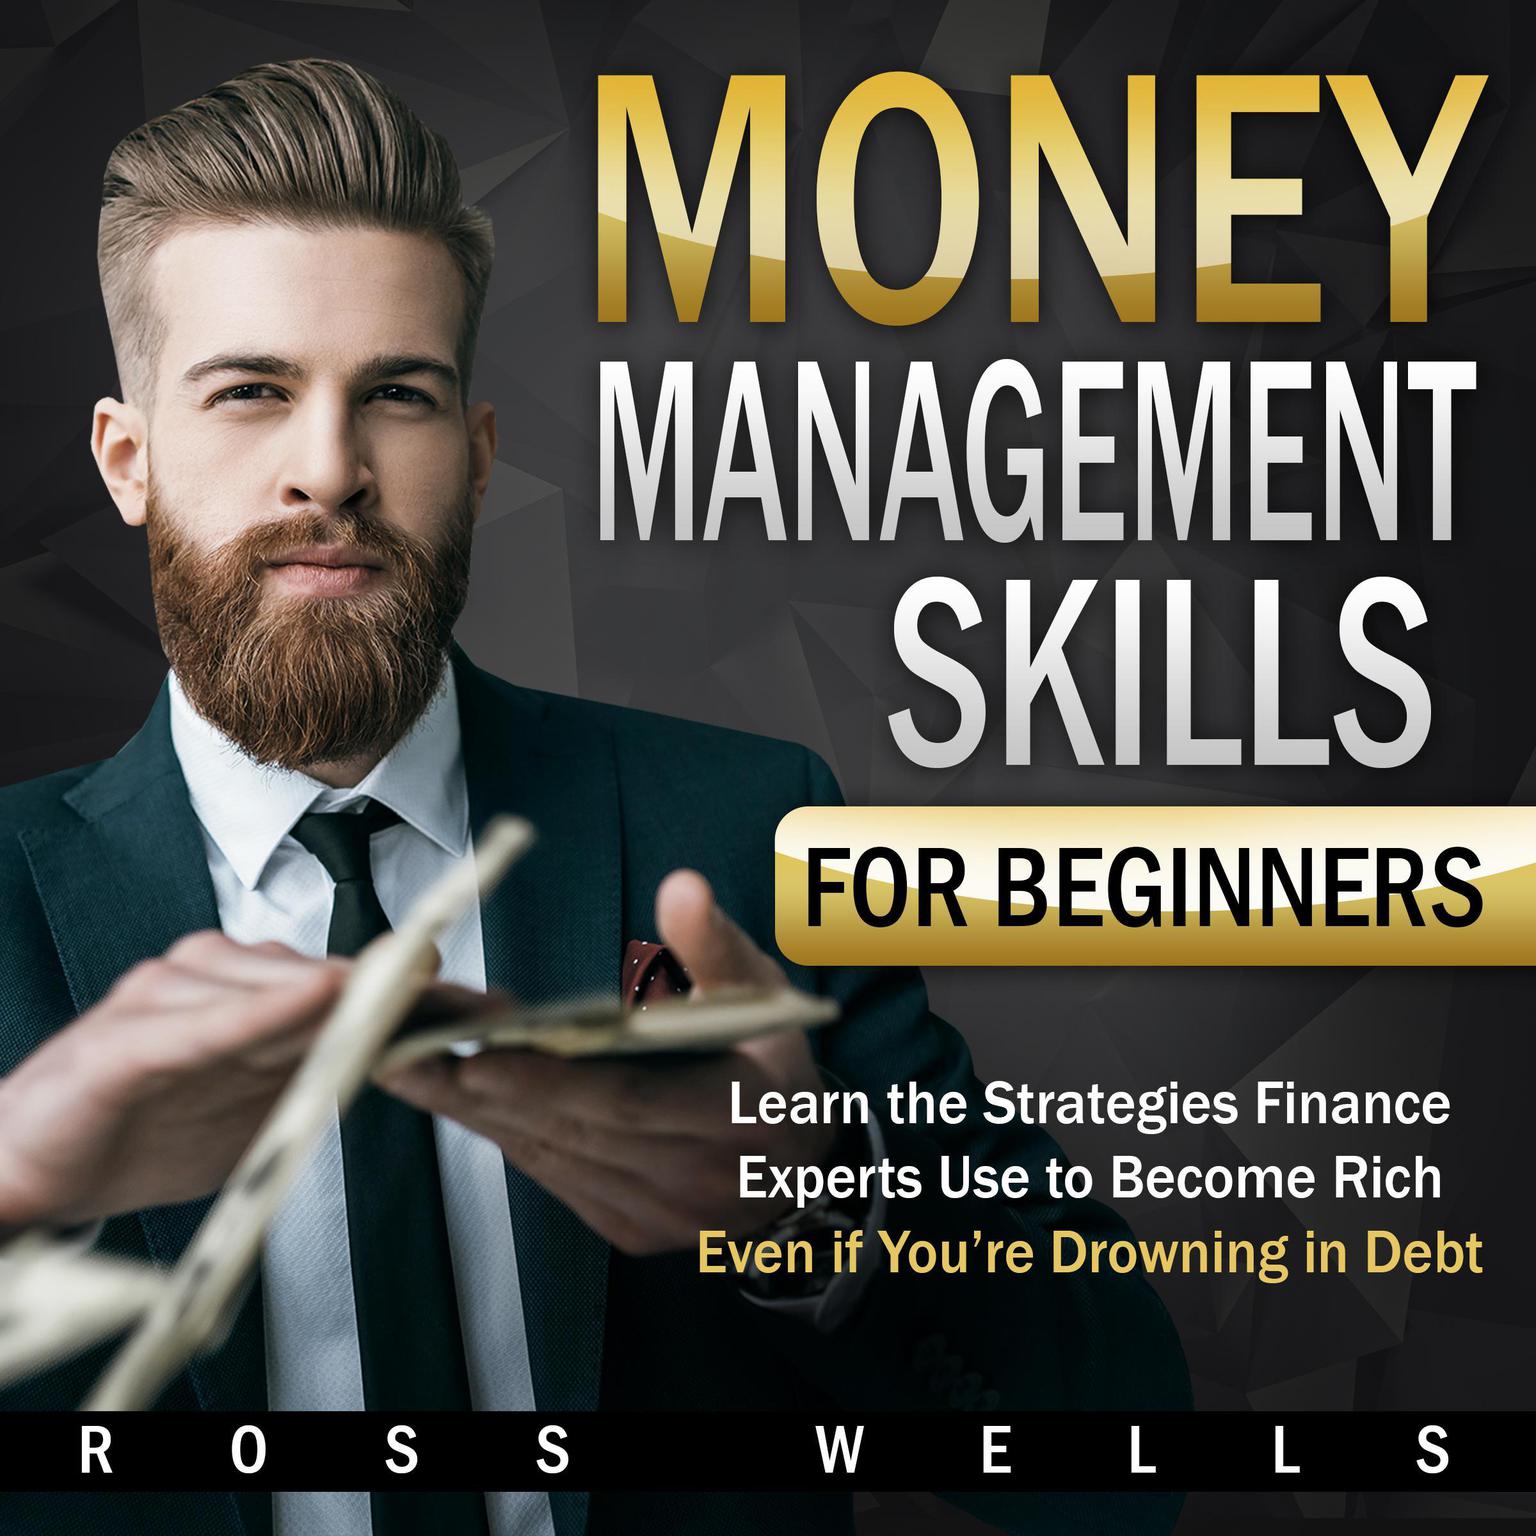 Money Management Skills for Beginners: Learn the Strategies Finance Experts Use to Become Rich - Even if Youre Drowning in Debt: Learn the Strategies Finance Experts Use to Become Rich - Even if You’re Drowning in Debt Audiobook, by Ross Wells